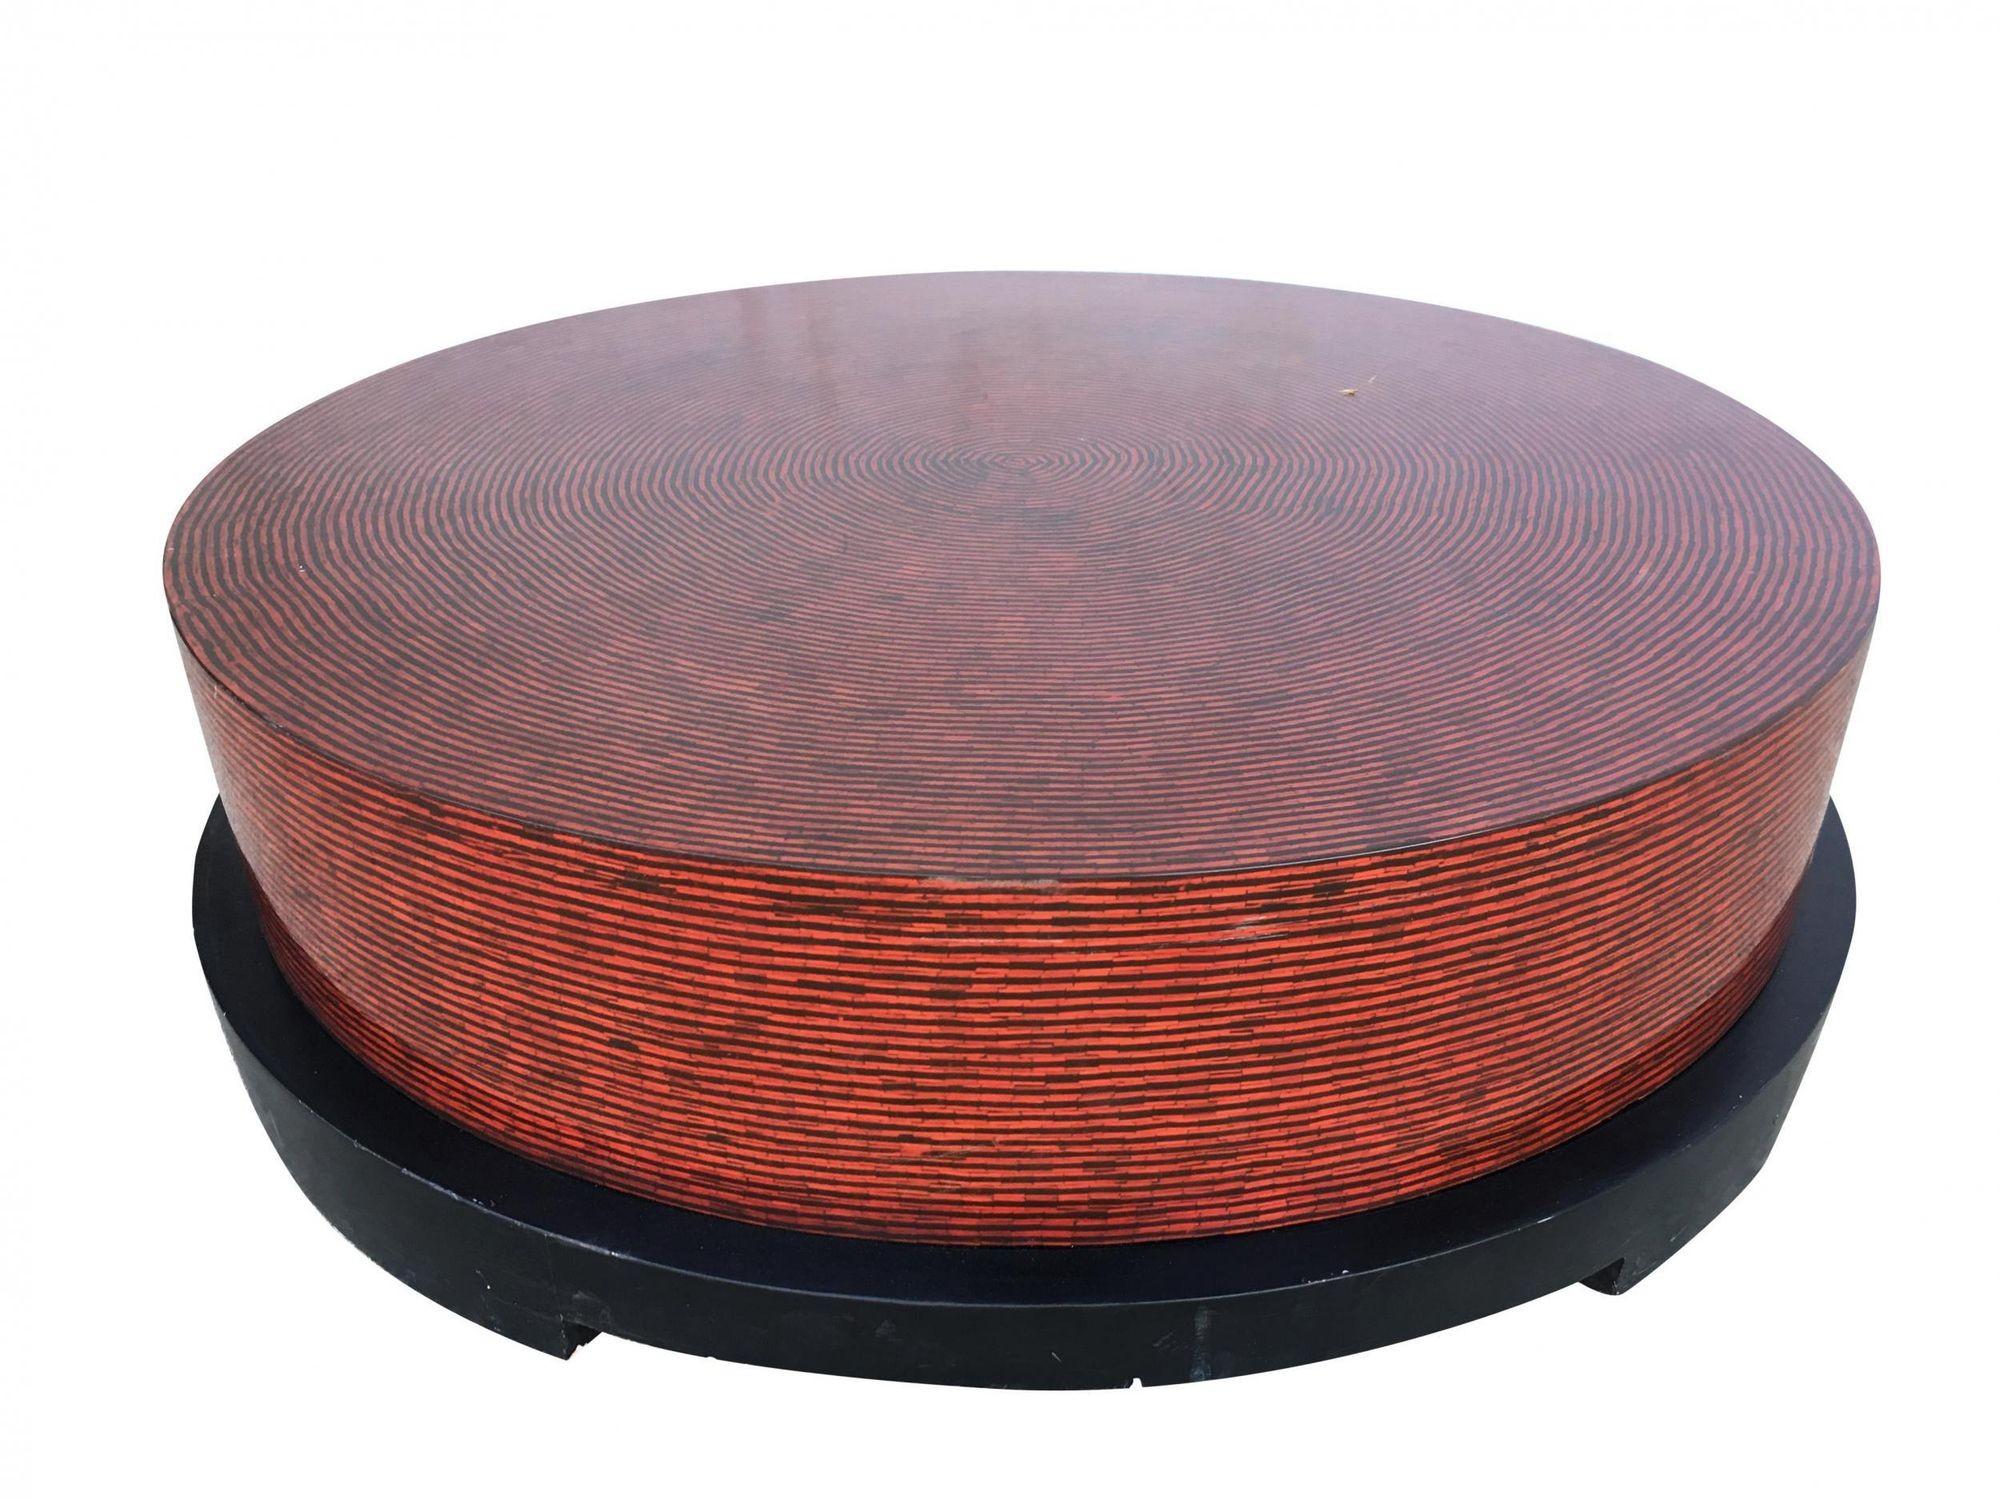 Pair of v round side table and coffee table with red and tan textured vinyl tops.

Circa 1990

Measures: Coffee table Height: 12 in. X diameter: 44 in.
Side tables: Height: 20 in. X diameter: 22 in.